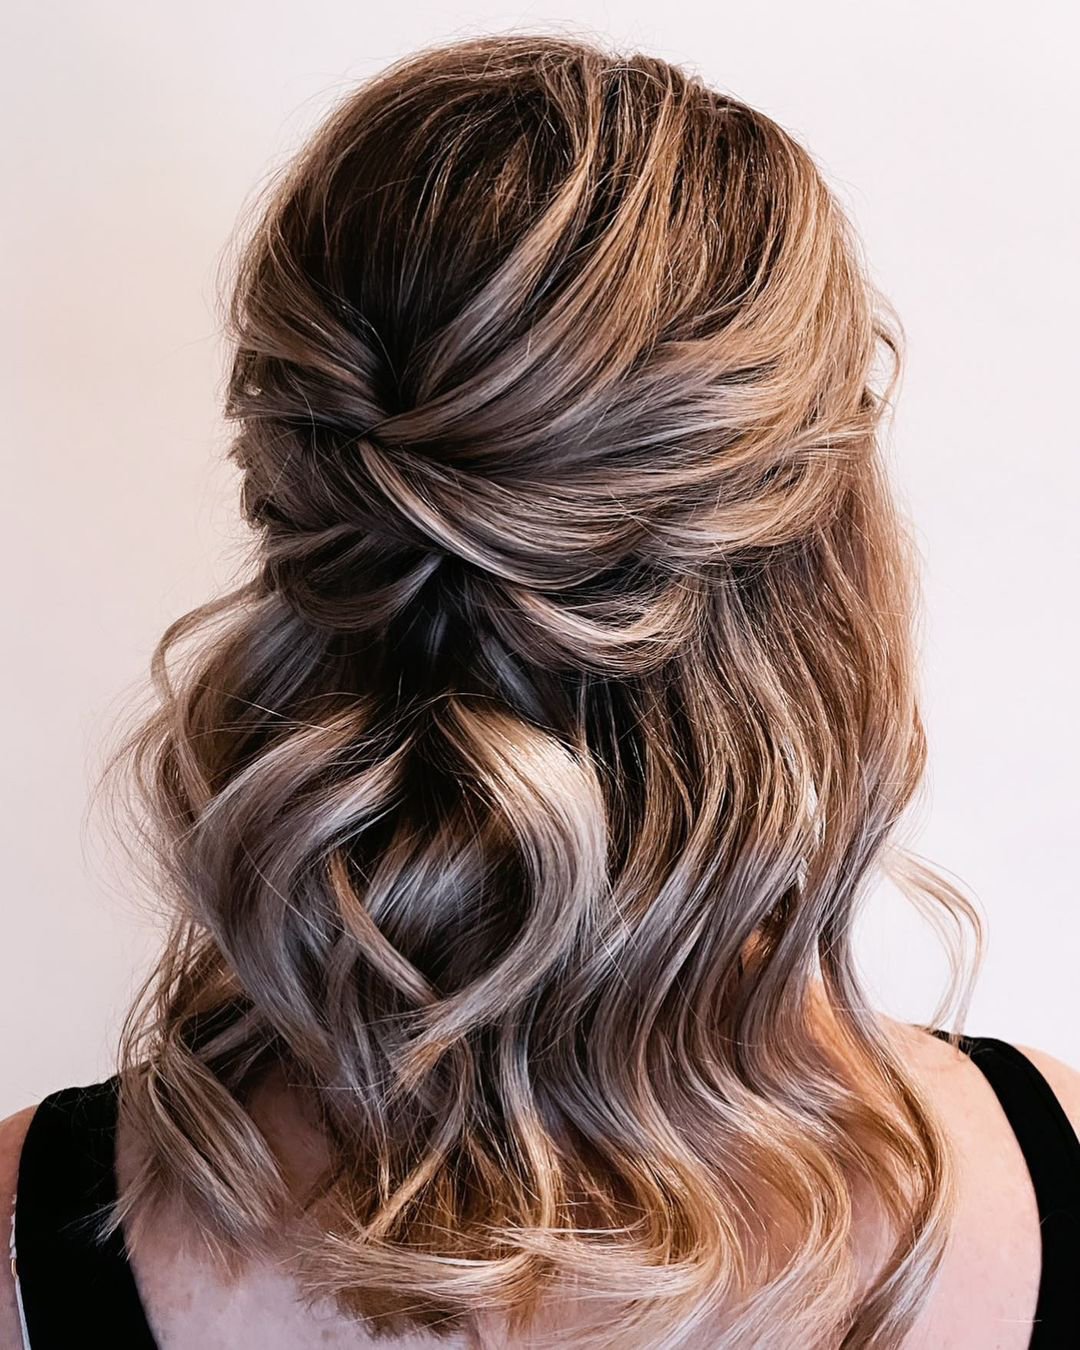 wedding hairstyles for thin hair textured half up updos.by.jocelyn